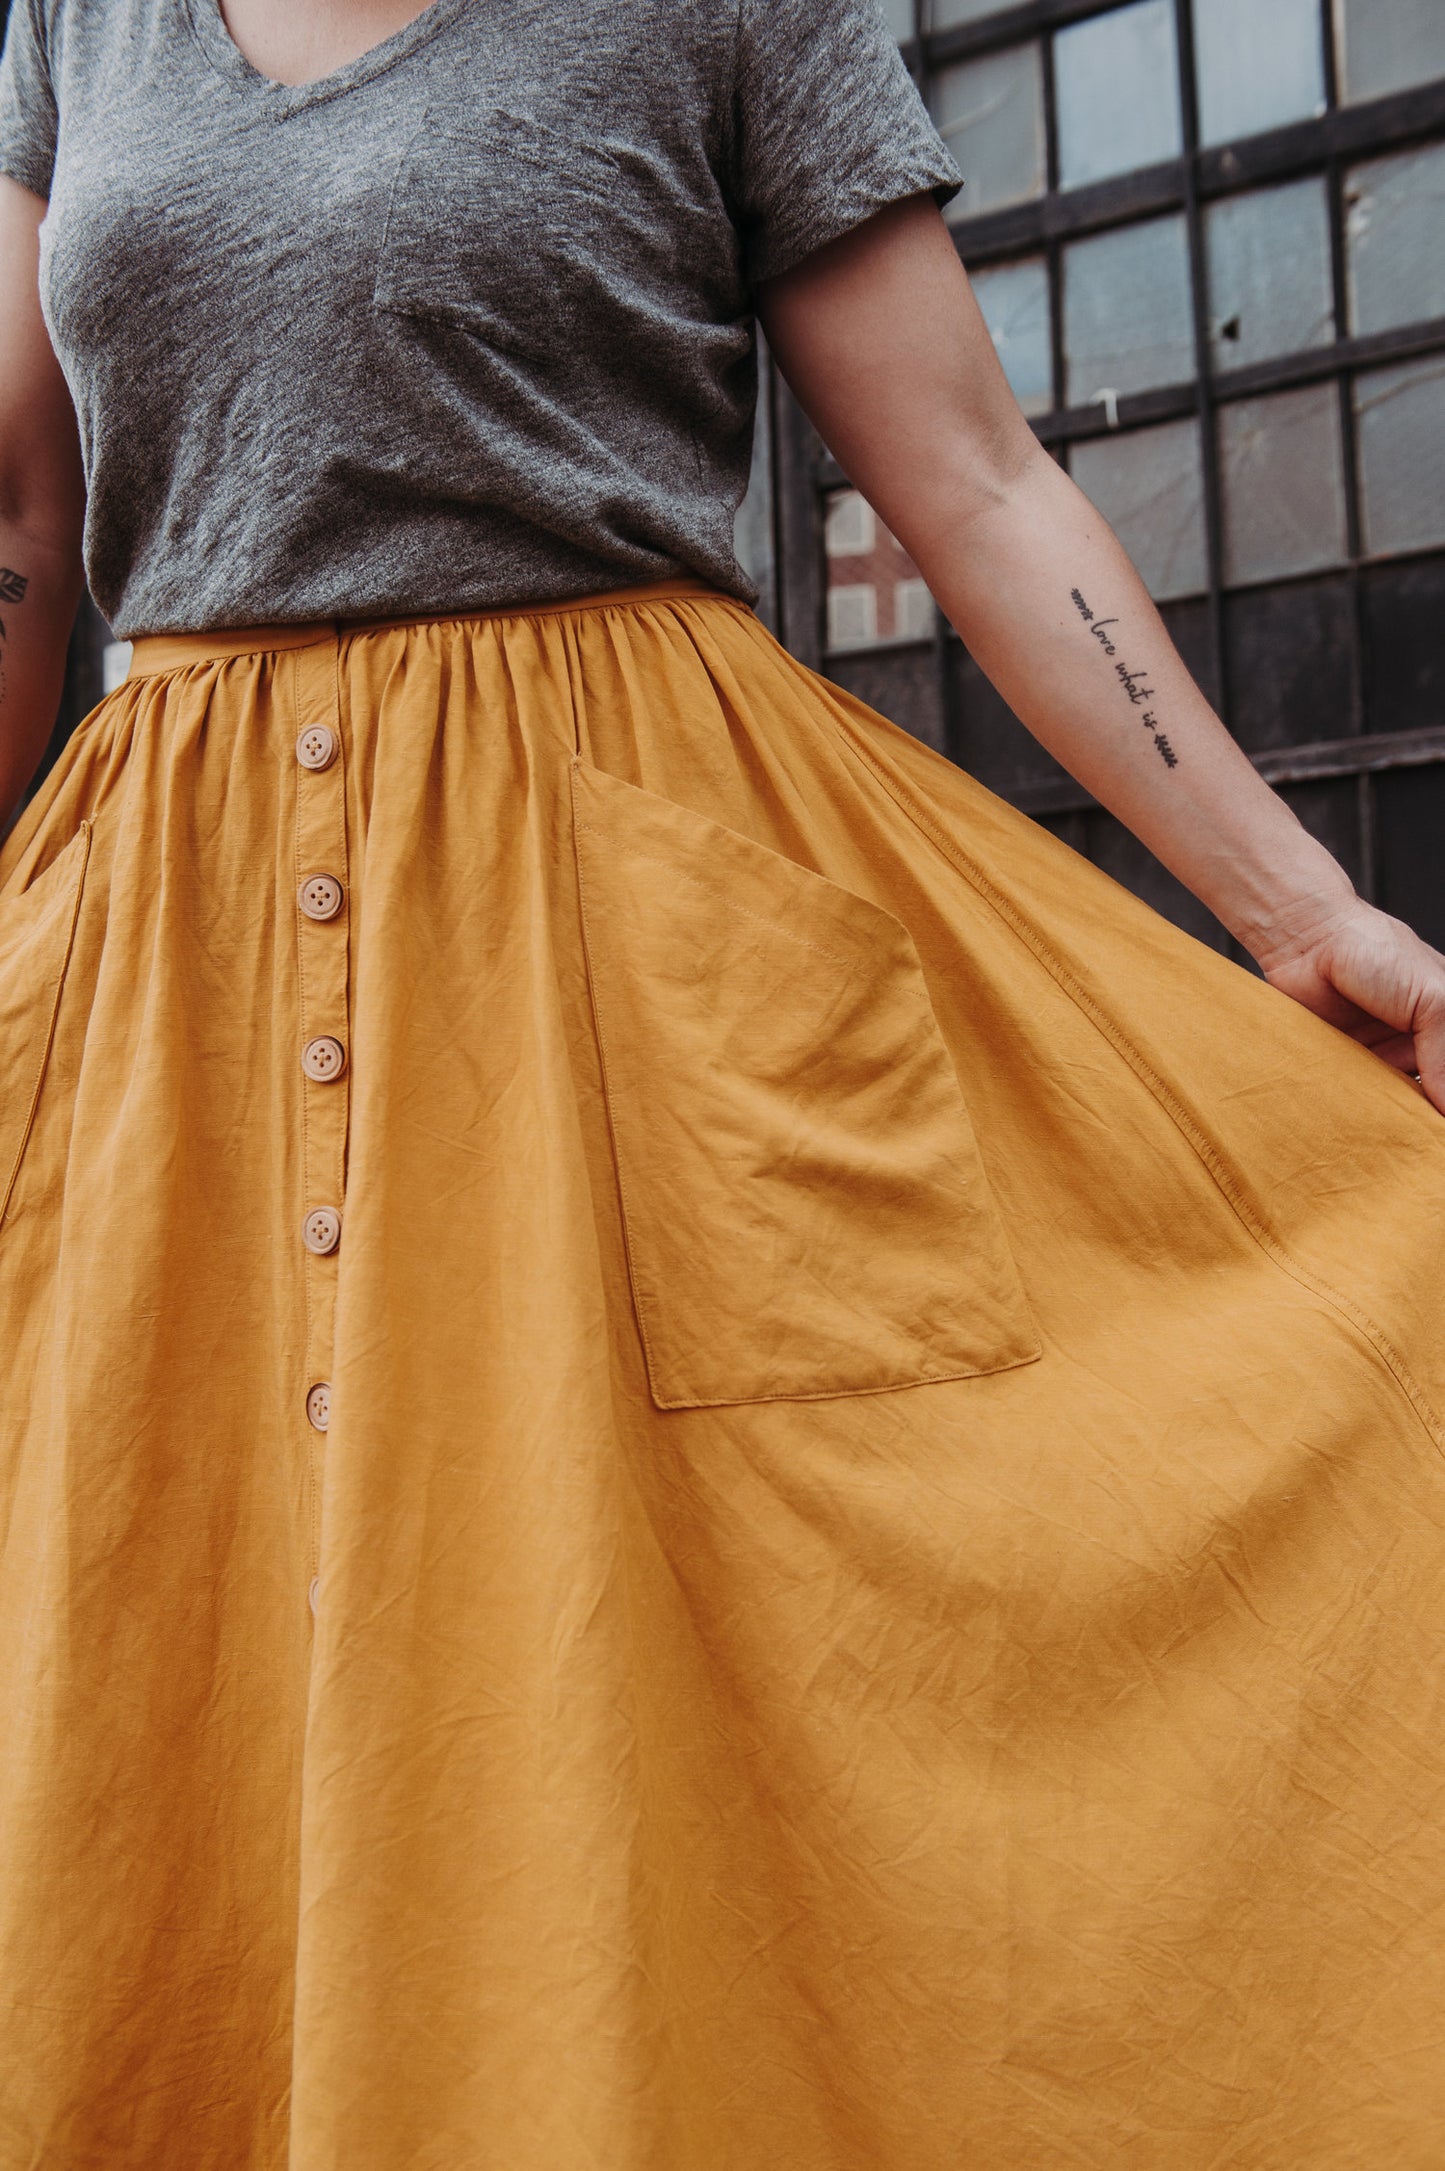 Estuary Skirt - By Sew Liberated Patterns